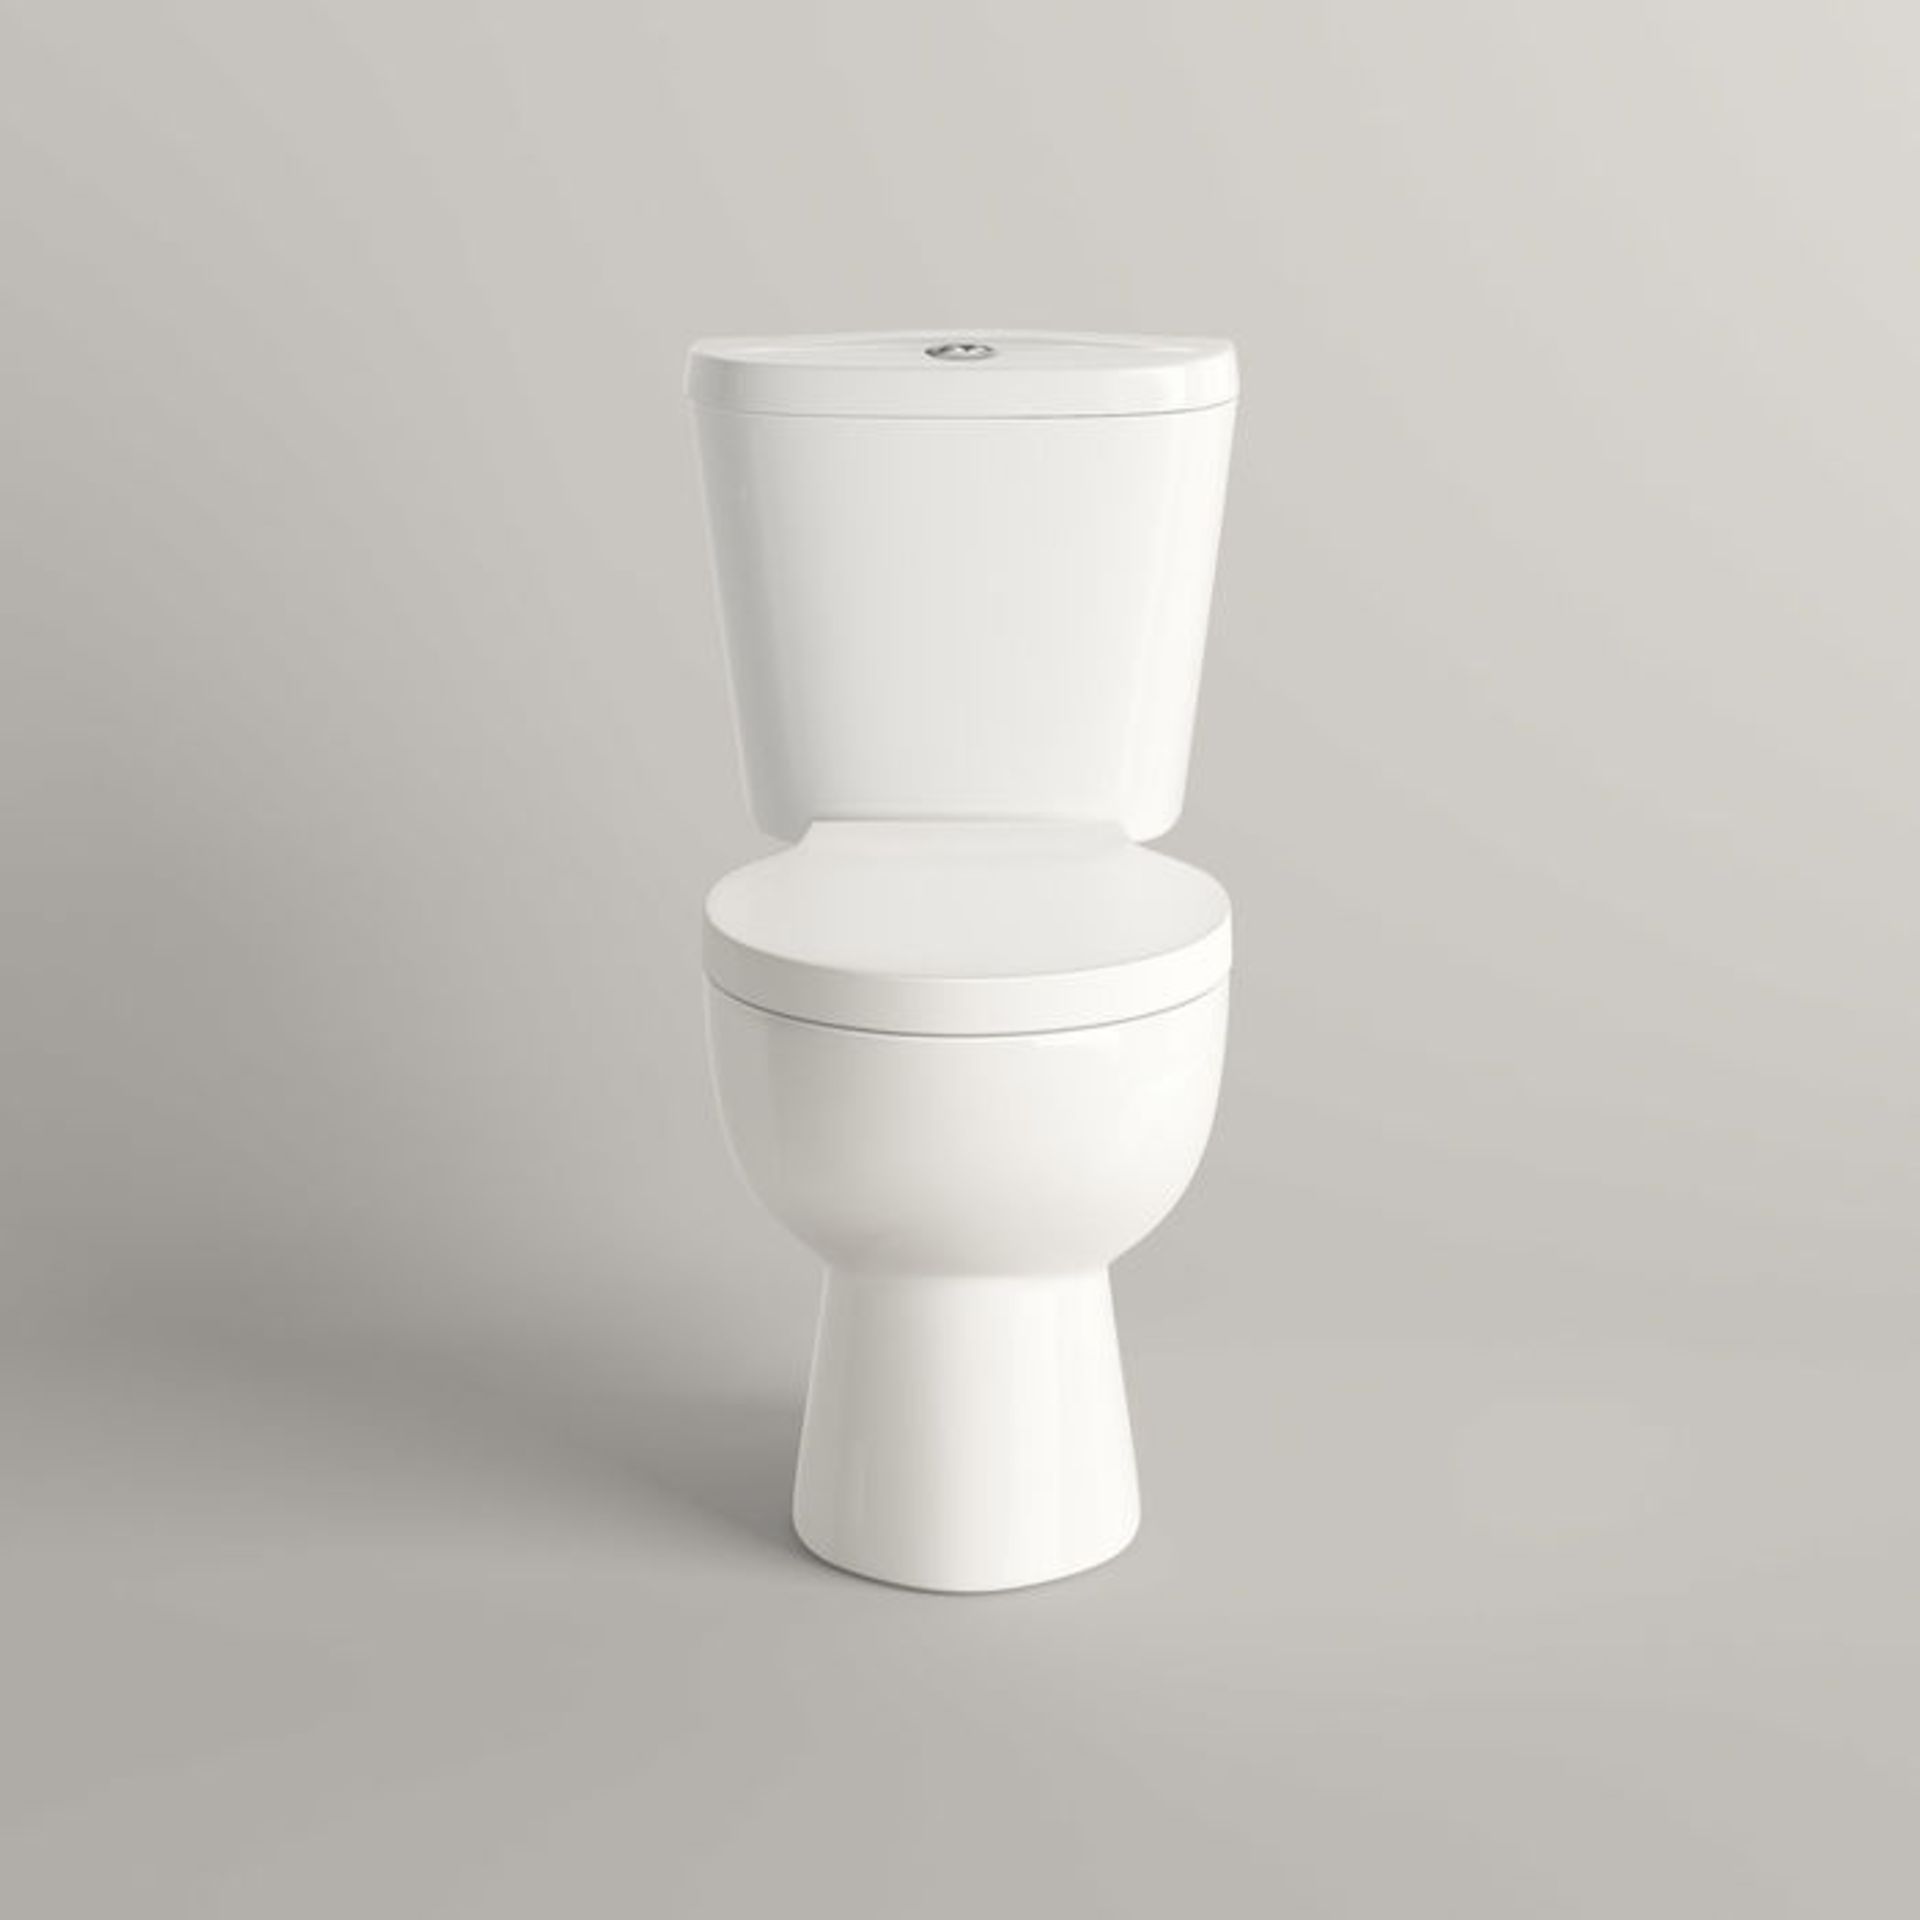 (AA141) Quartz Close Coupled Toilet.. We love this because it is simply great value! Made from ... - Image 3 of 3